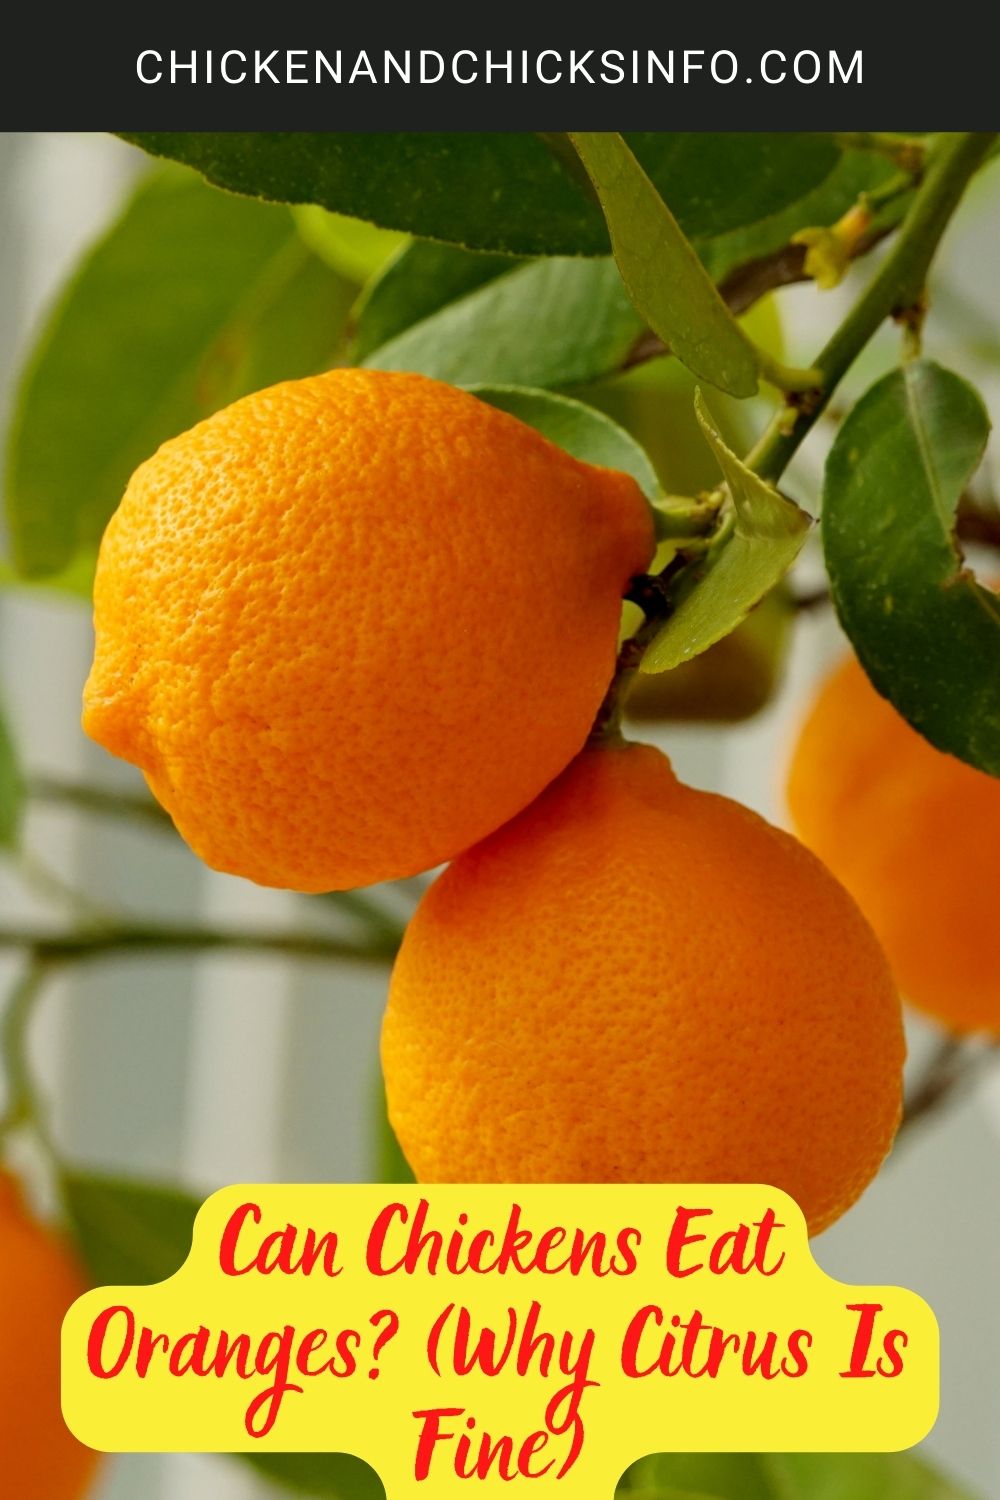 Can Chickens Eat Oranges? (Why Citrus Is Fine) poster.
